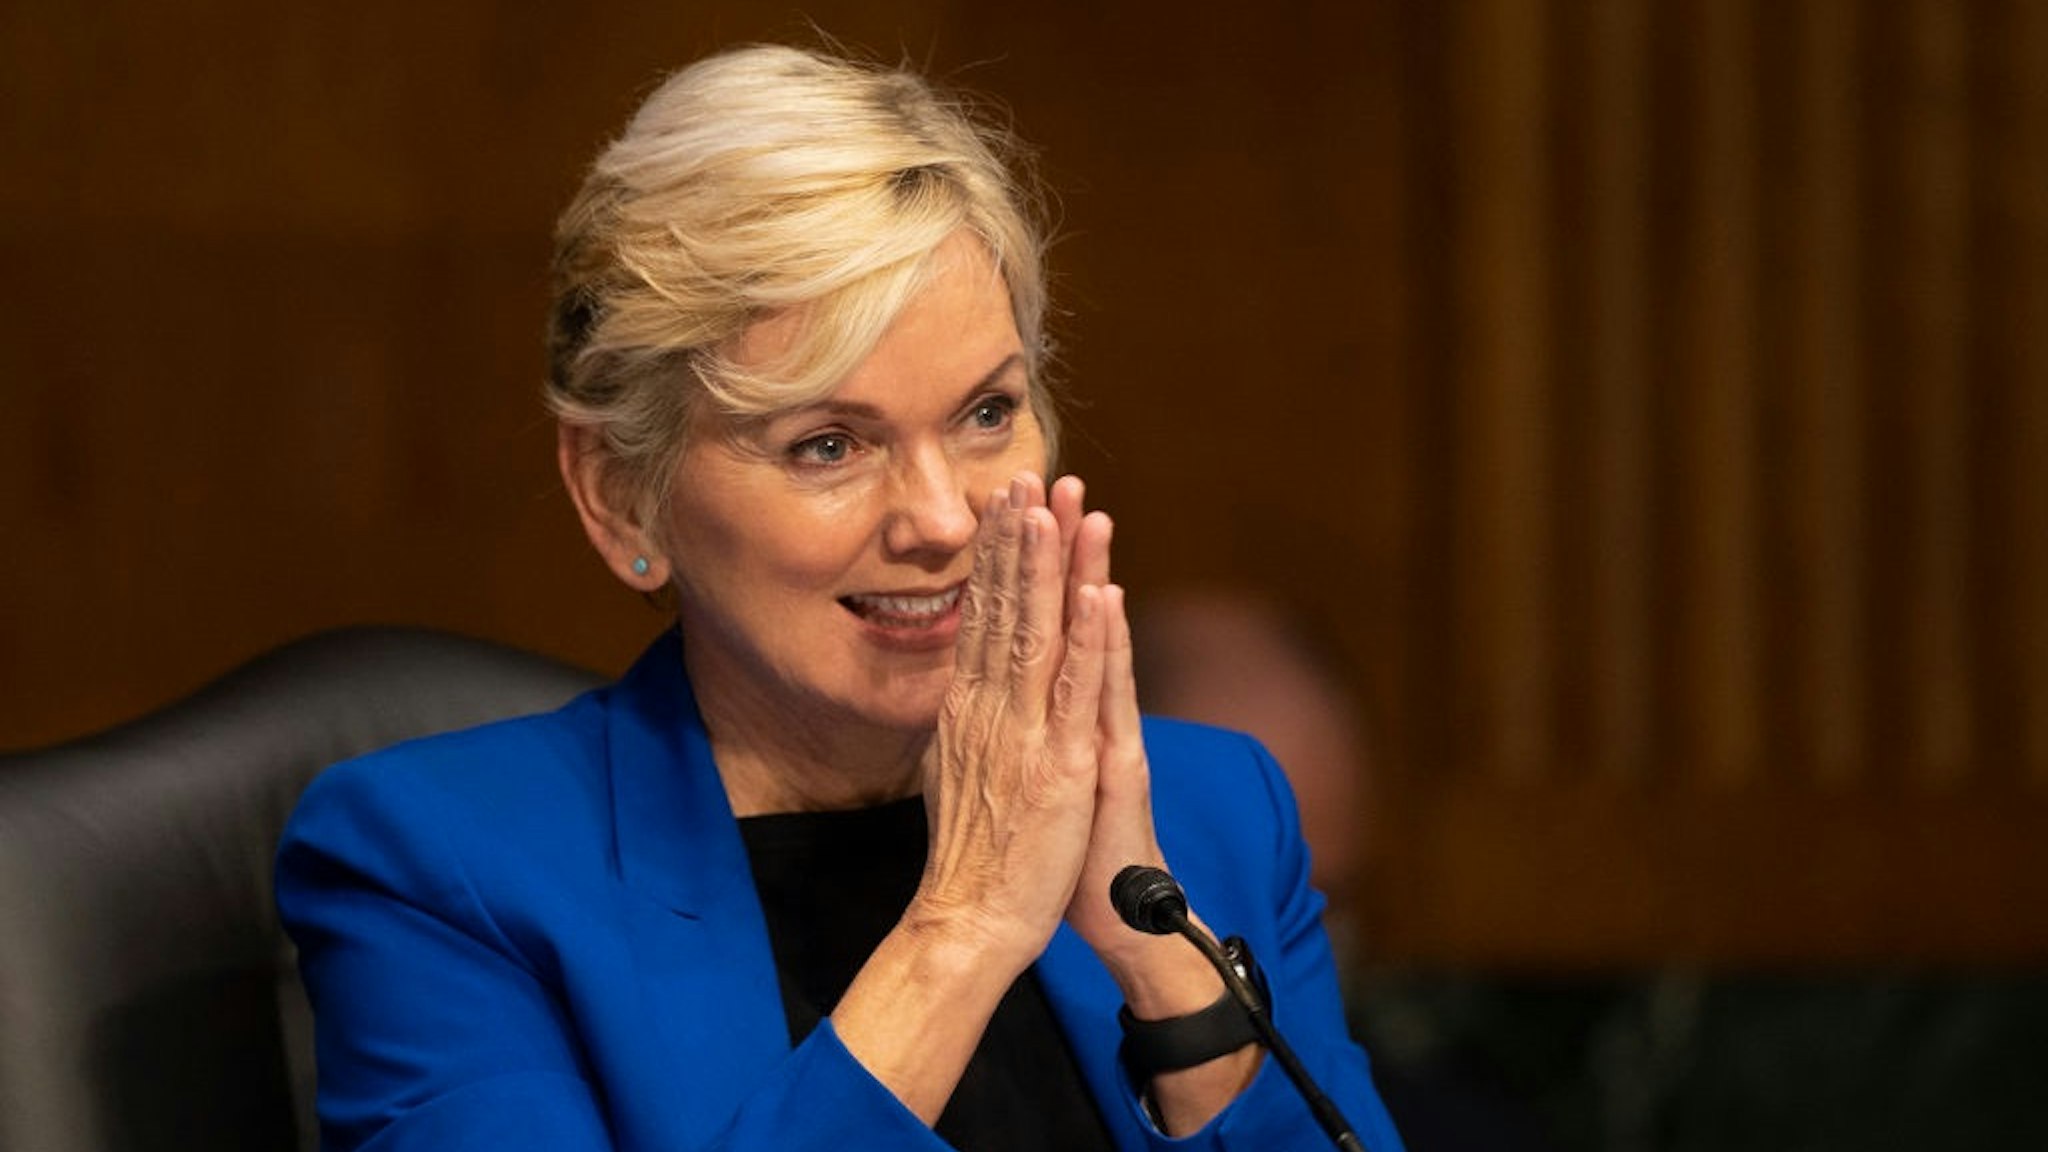 WASHINGTON, DC - JANUARY 27: Former Michigan Governor Jennifer Granholm thanks the committee after testifying before the Senate Energy and Natural Resources Committee during a hearing to examine her nomination to be Secretary of Energy, on Capitol Hill, January 27, 2021.